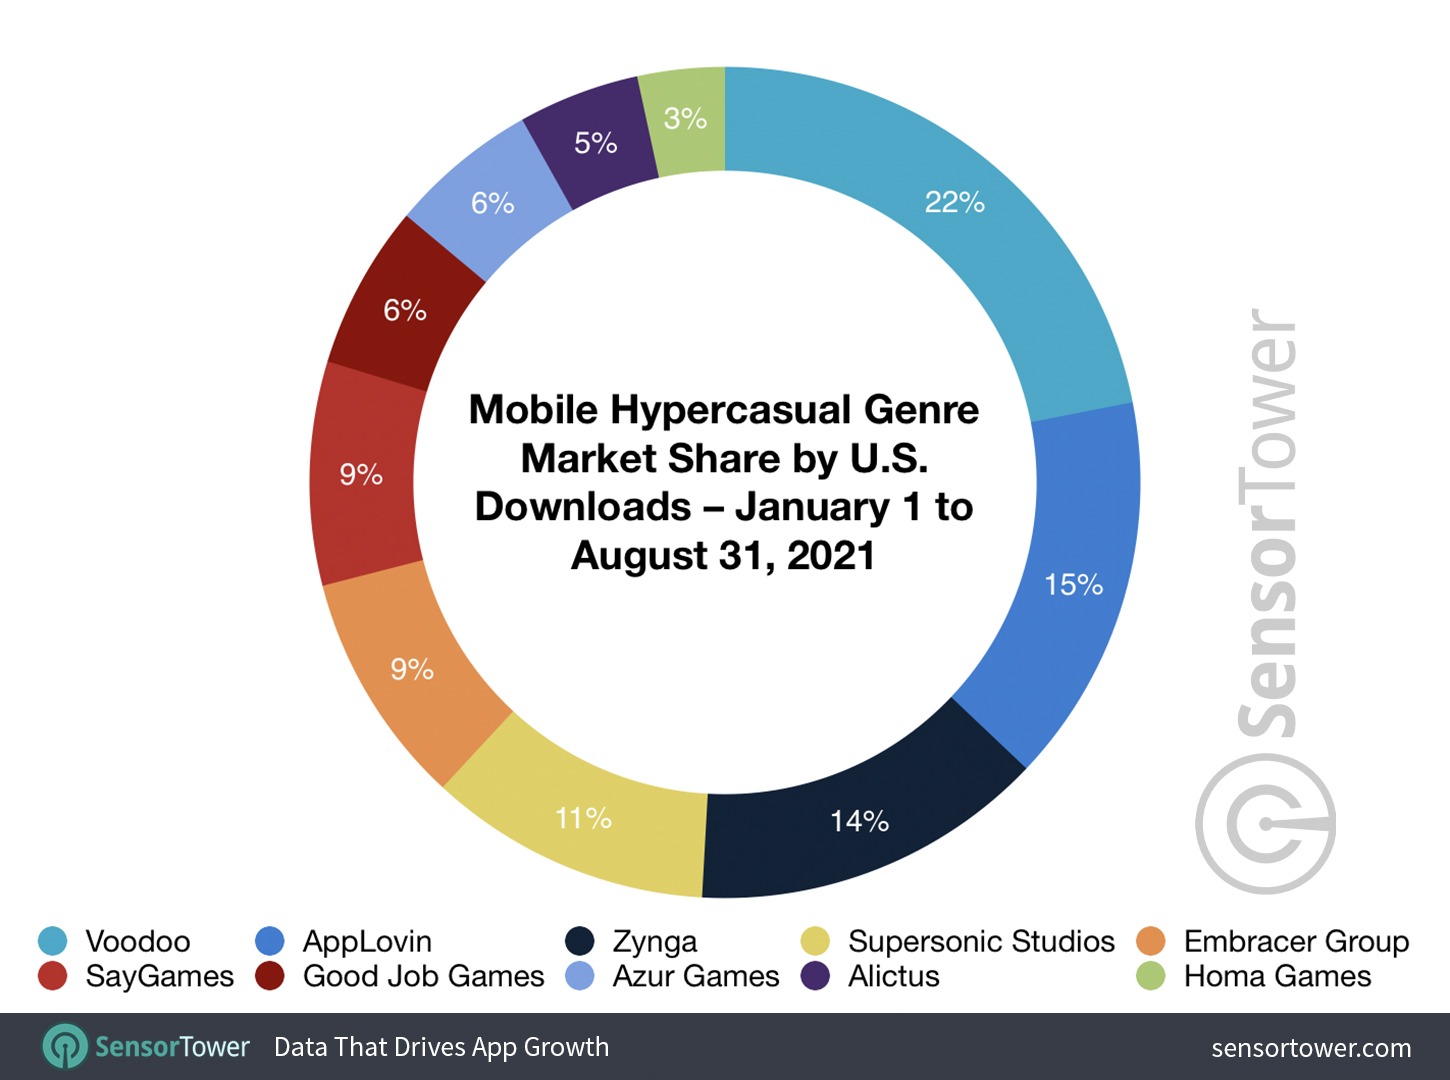 Mobile Hypercasual Genre Market Share by U.S. Downloads – January 1 to August 31, 2021